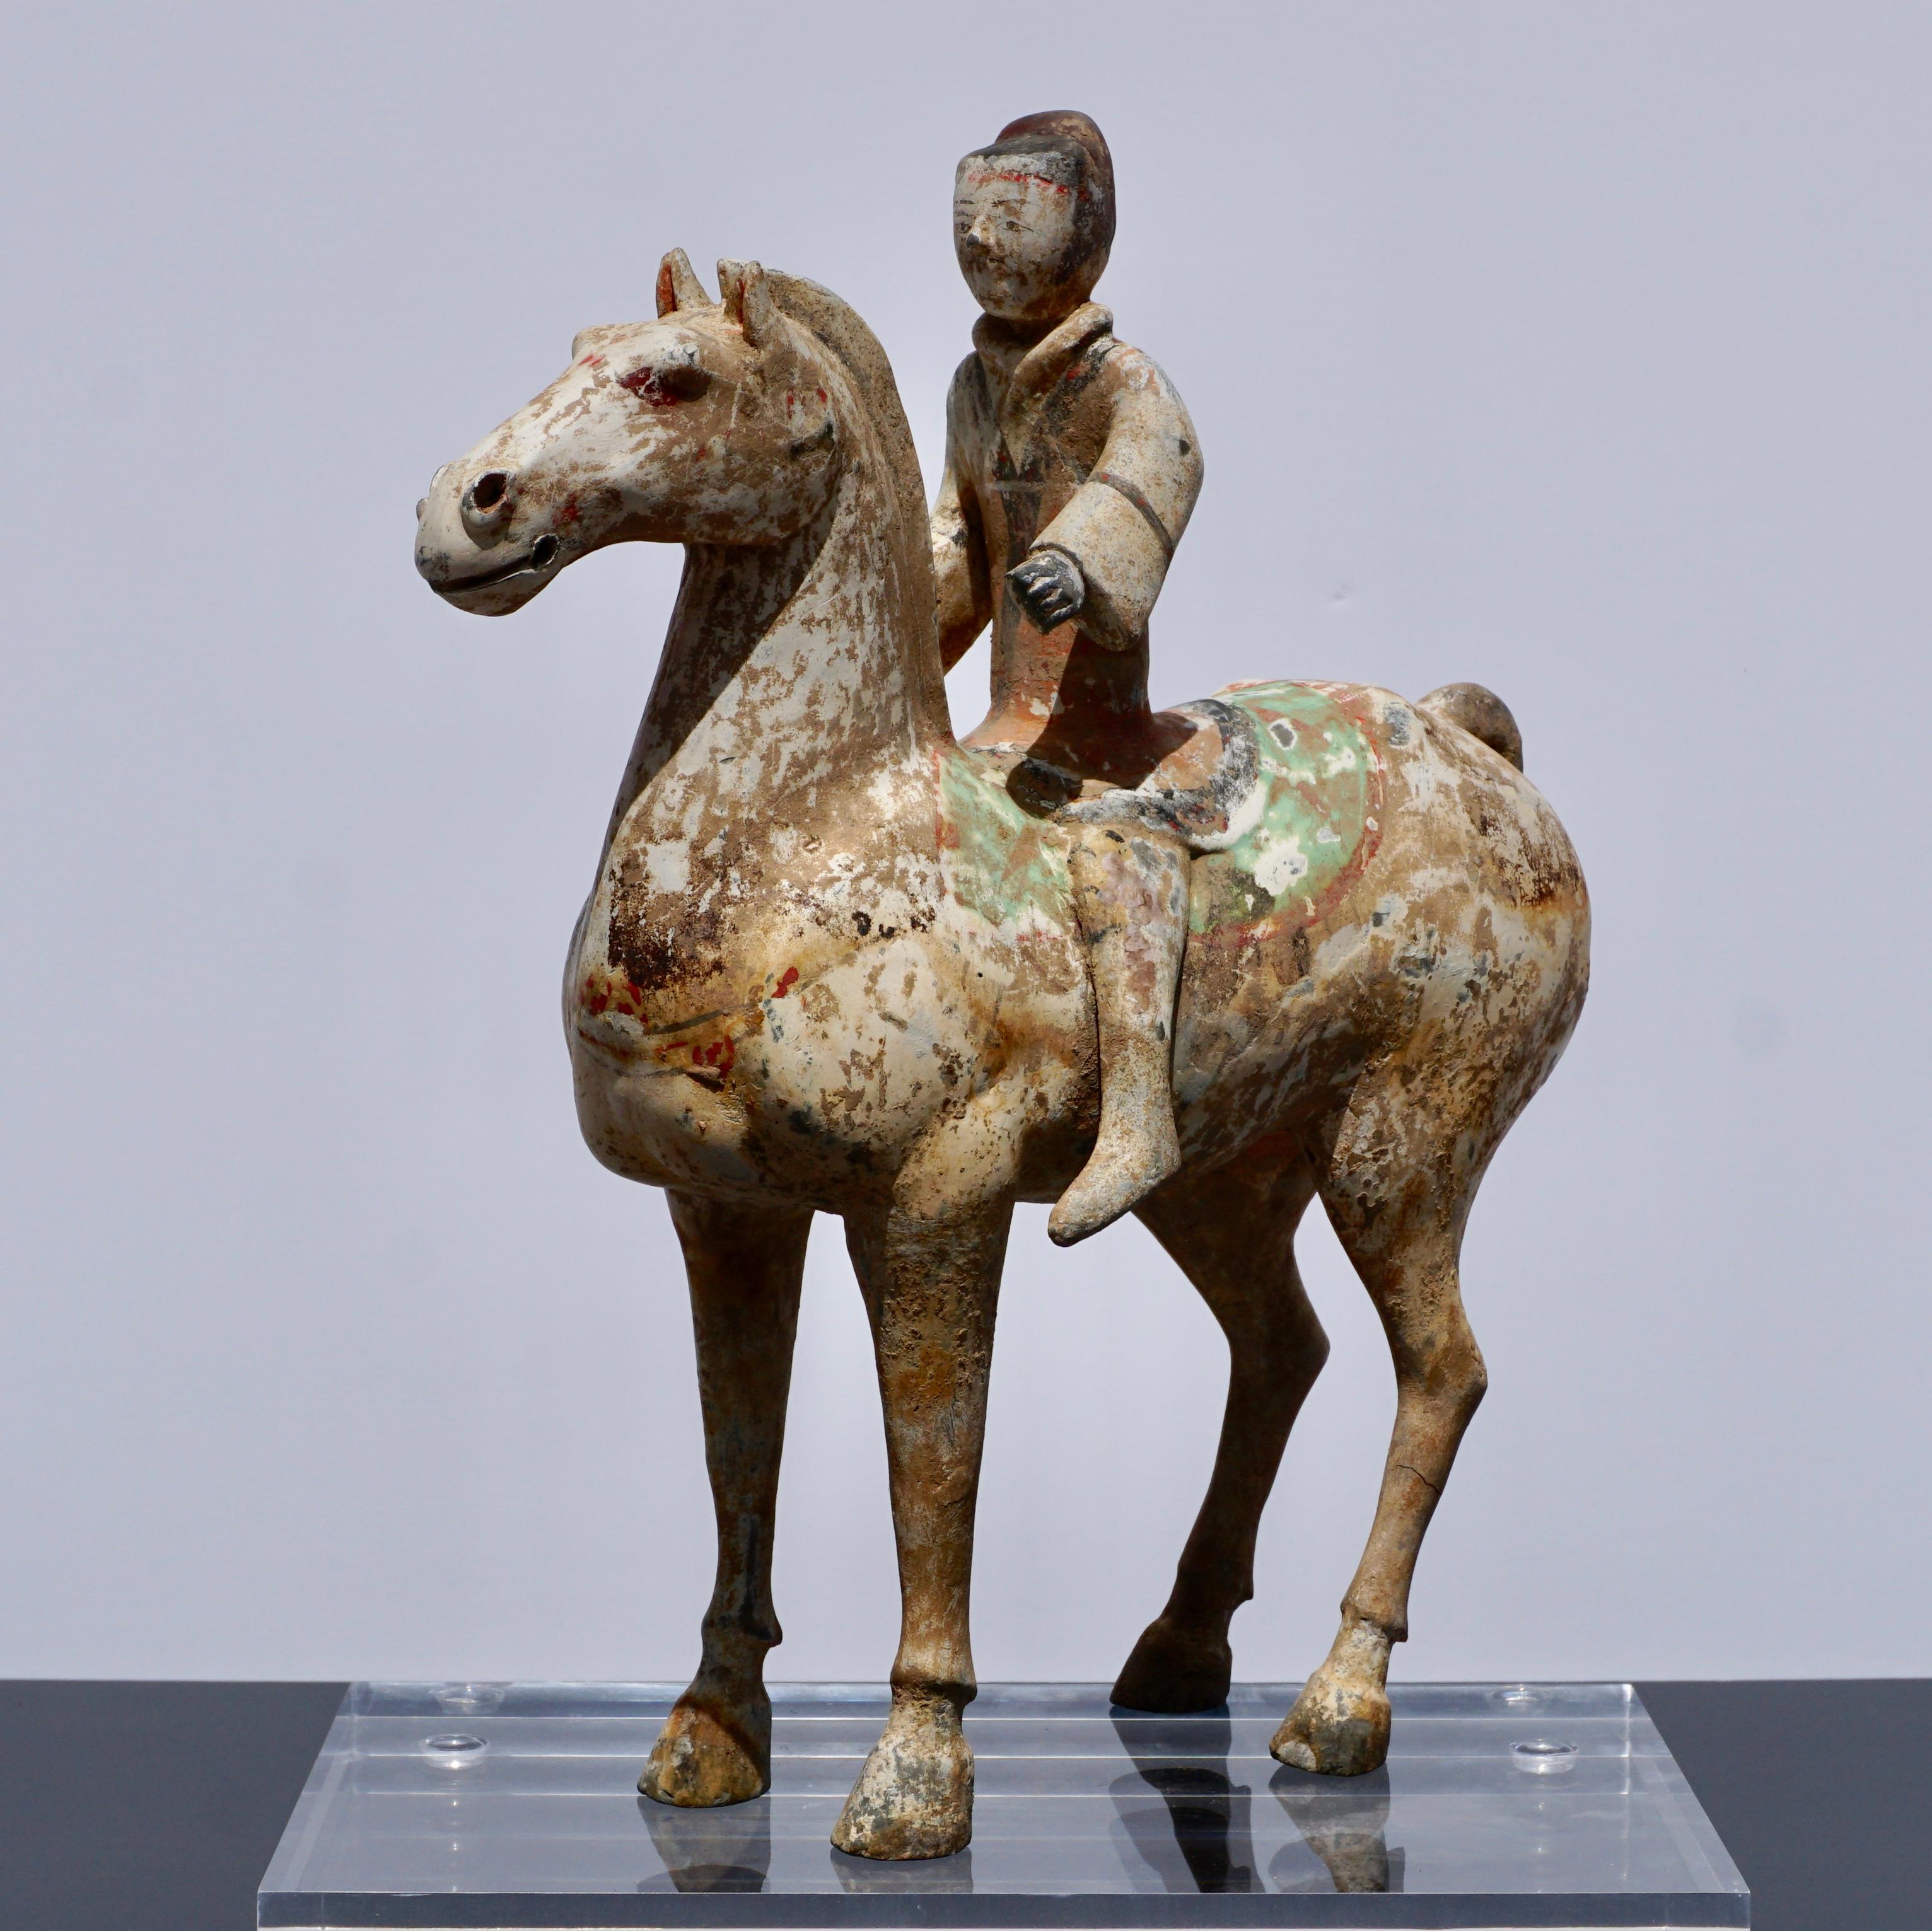 Hand-Crafted Han Dynasty Horse and Rider Terracotta, 206 BC-220 AD